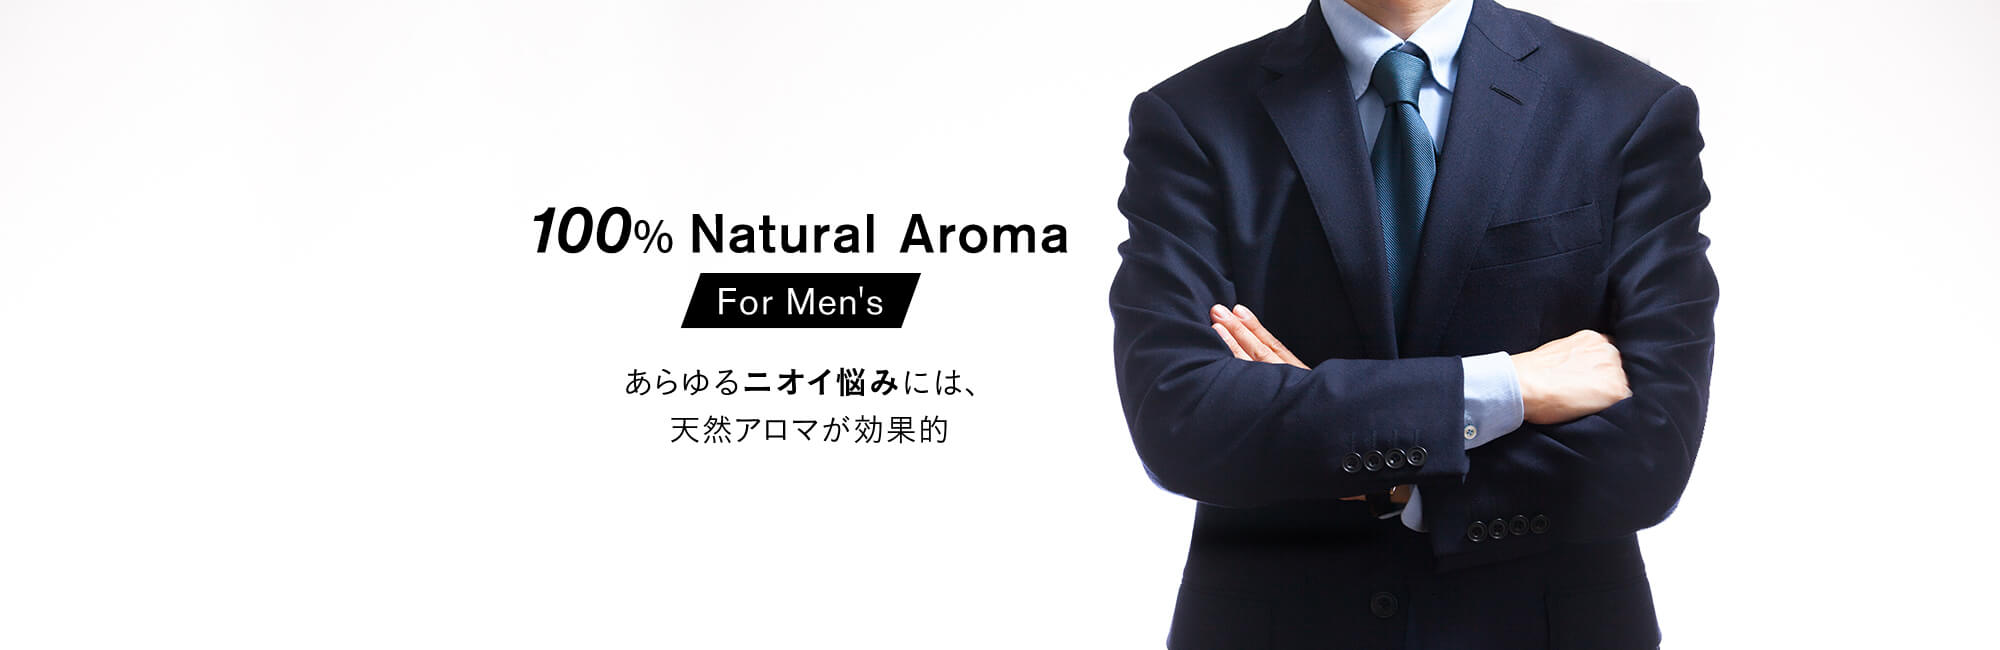 100% Natural Aroma for Men's「あらゆるニオイ悩みには、天然アロマが効果的」